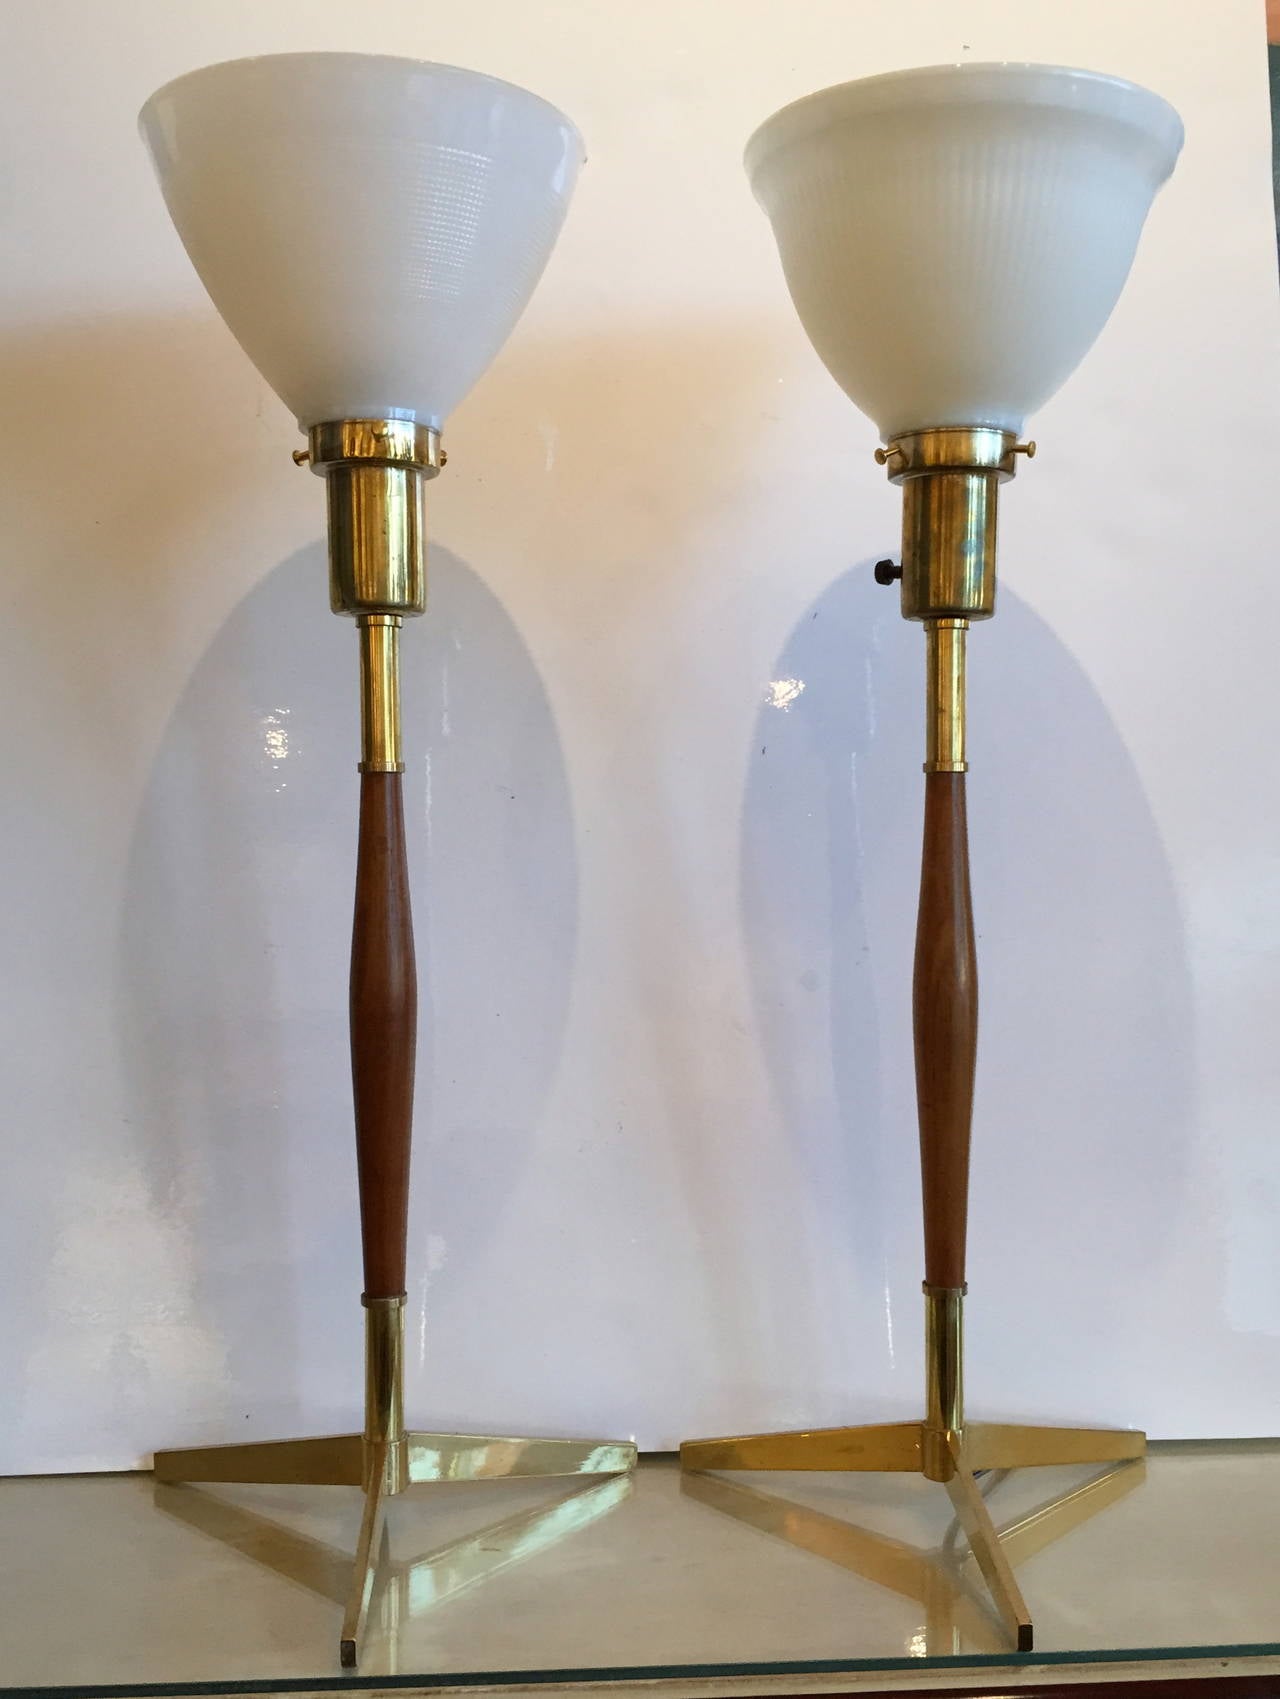 These sleek lamps are 25.5 inches high to the top of the diffusor.  The body of the lamp is 17 inches high.  The diffusors are included; the shades are not.

Please contact us directly for shipping options.